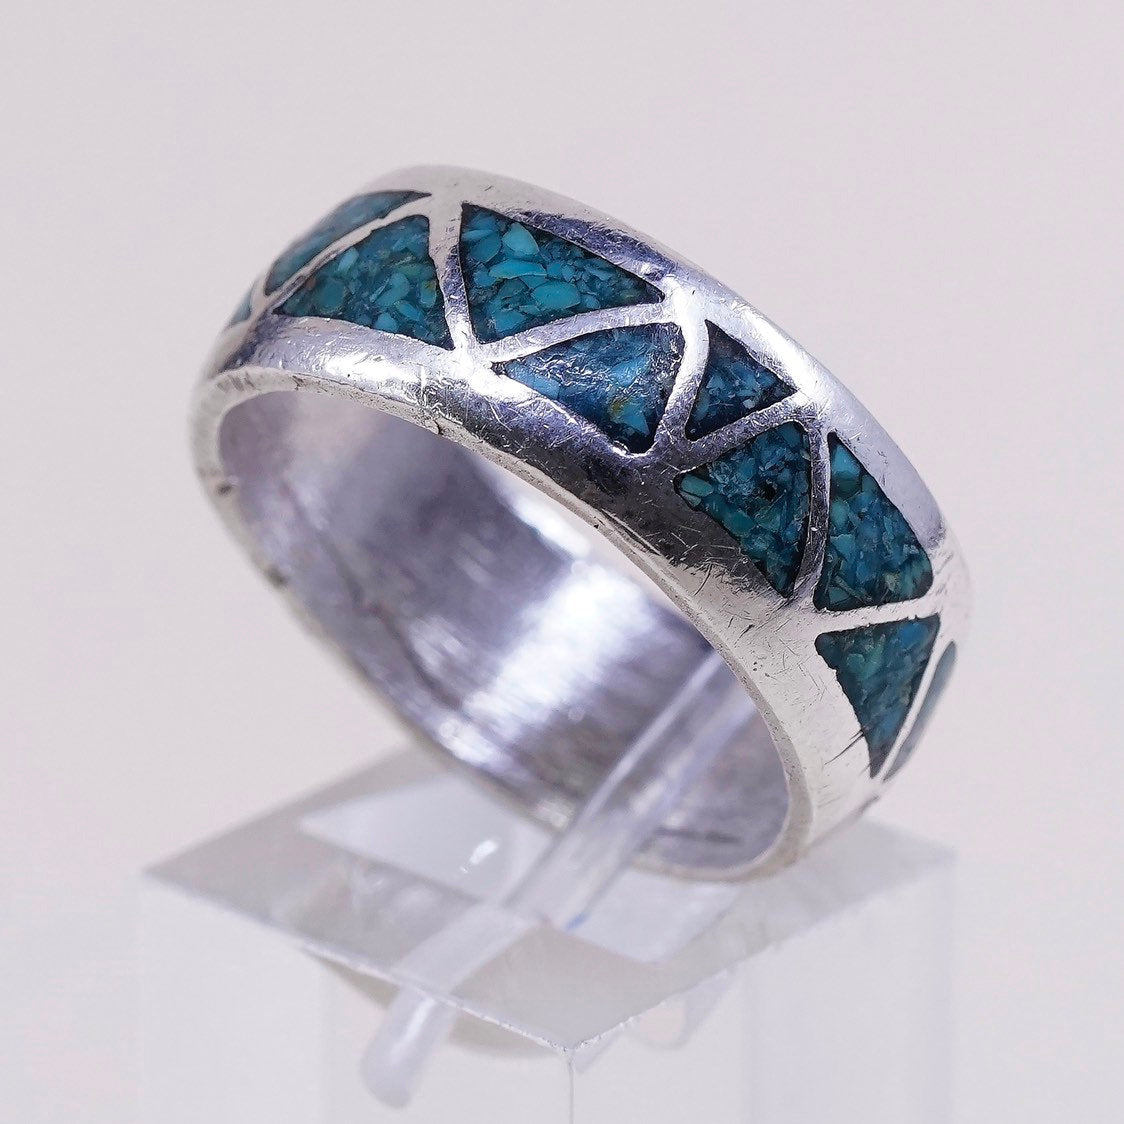 sz 11, Sterling silver handmade ring, 925 band w/ turquoise inlay, Zuni